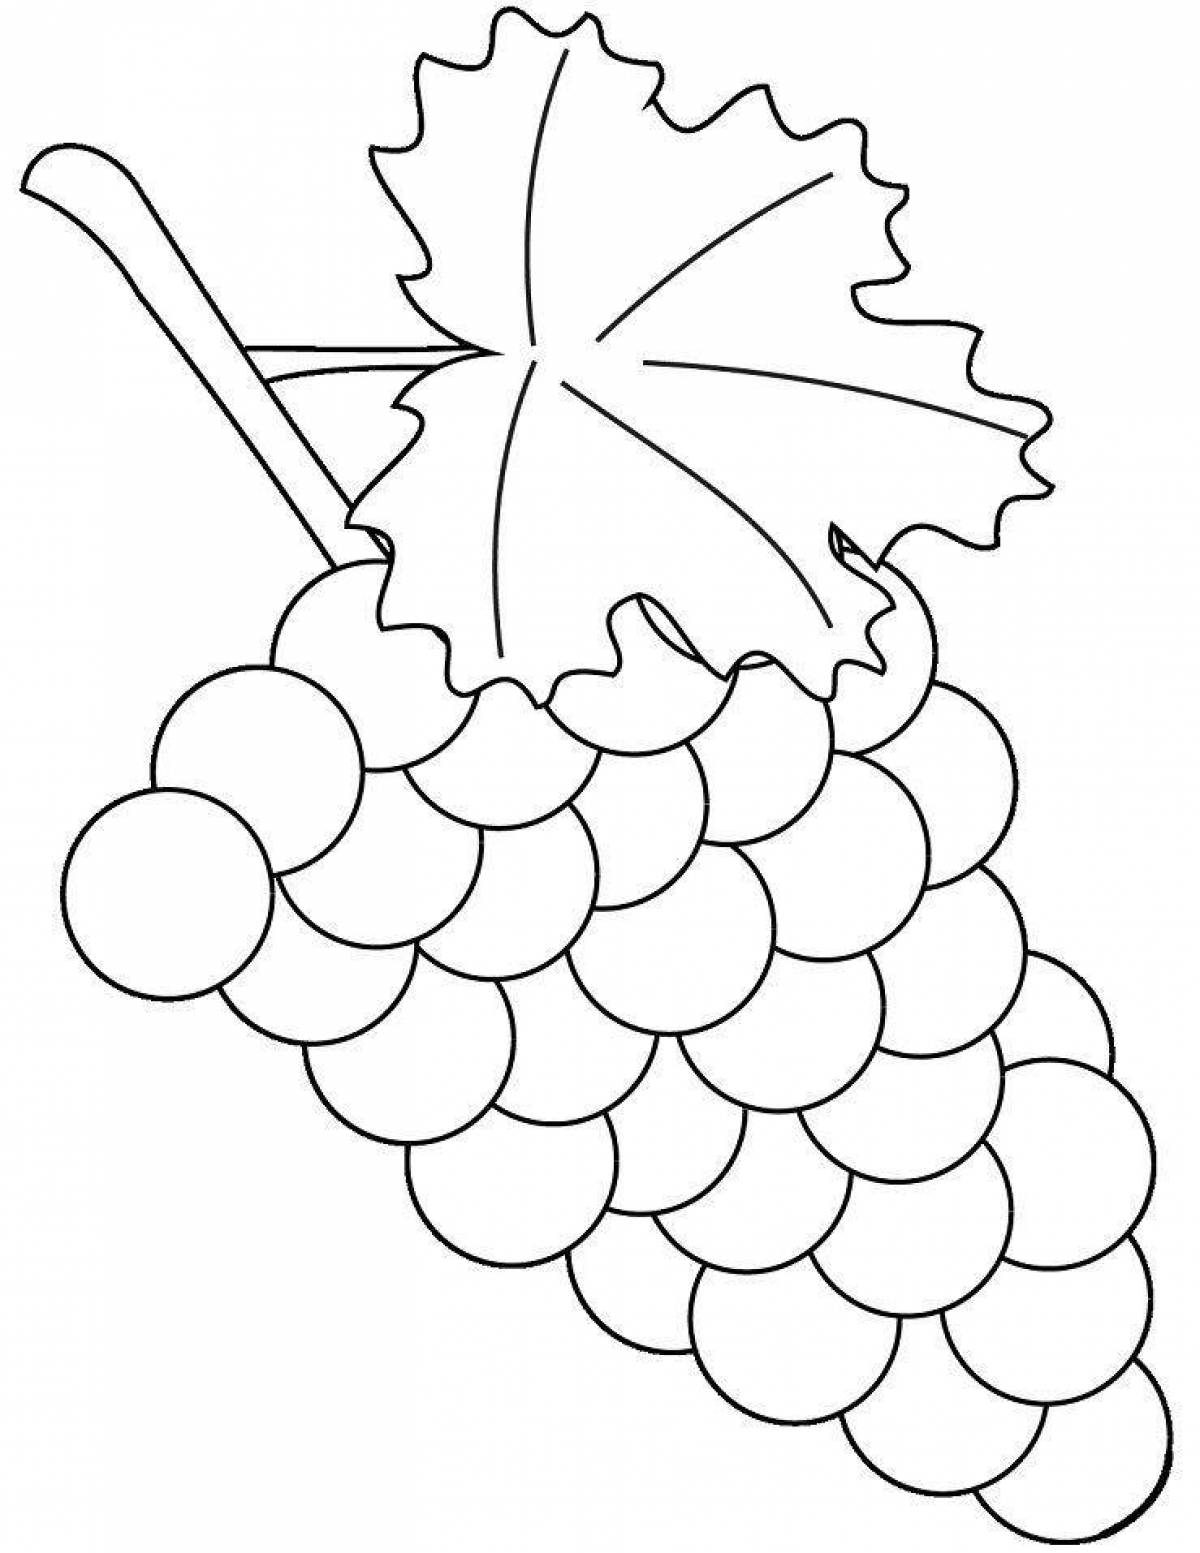 Glowing grapes coloring book for kids